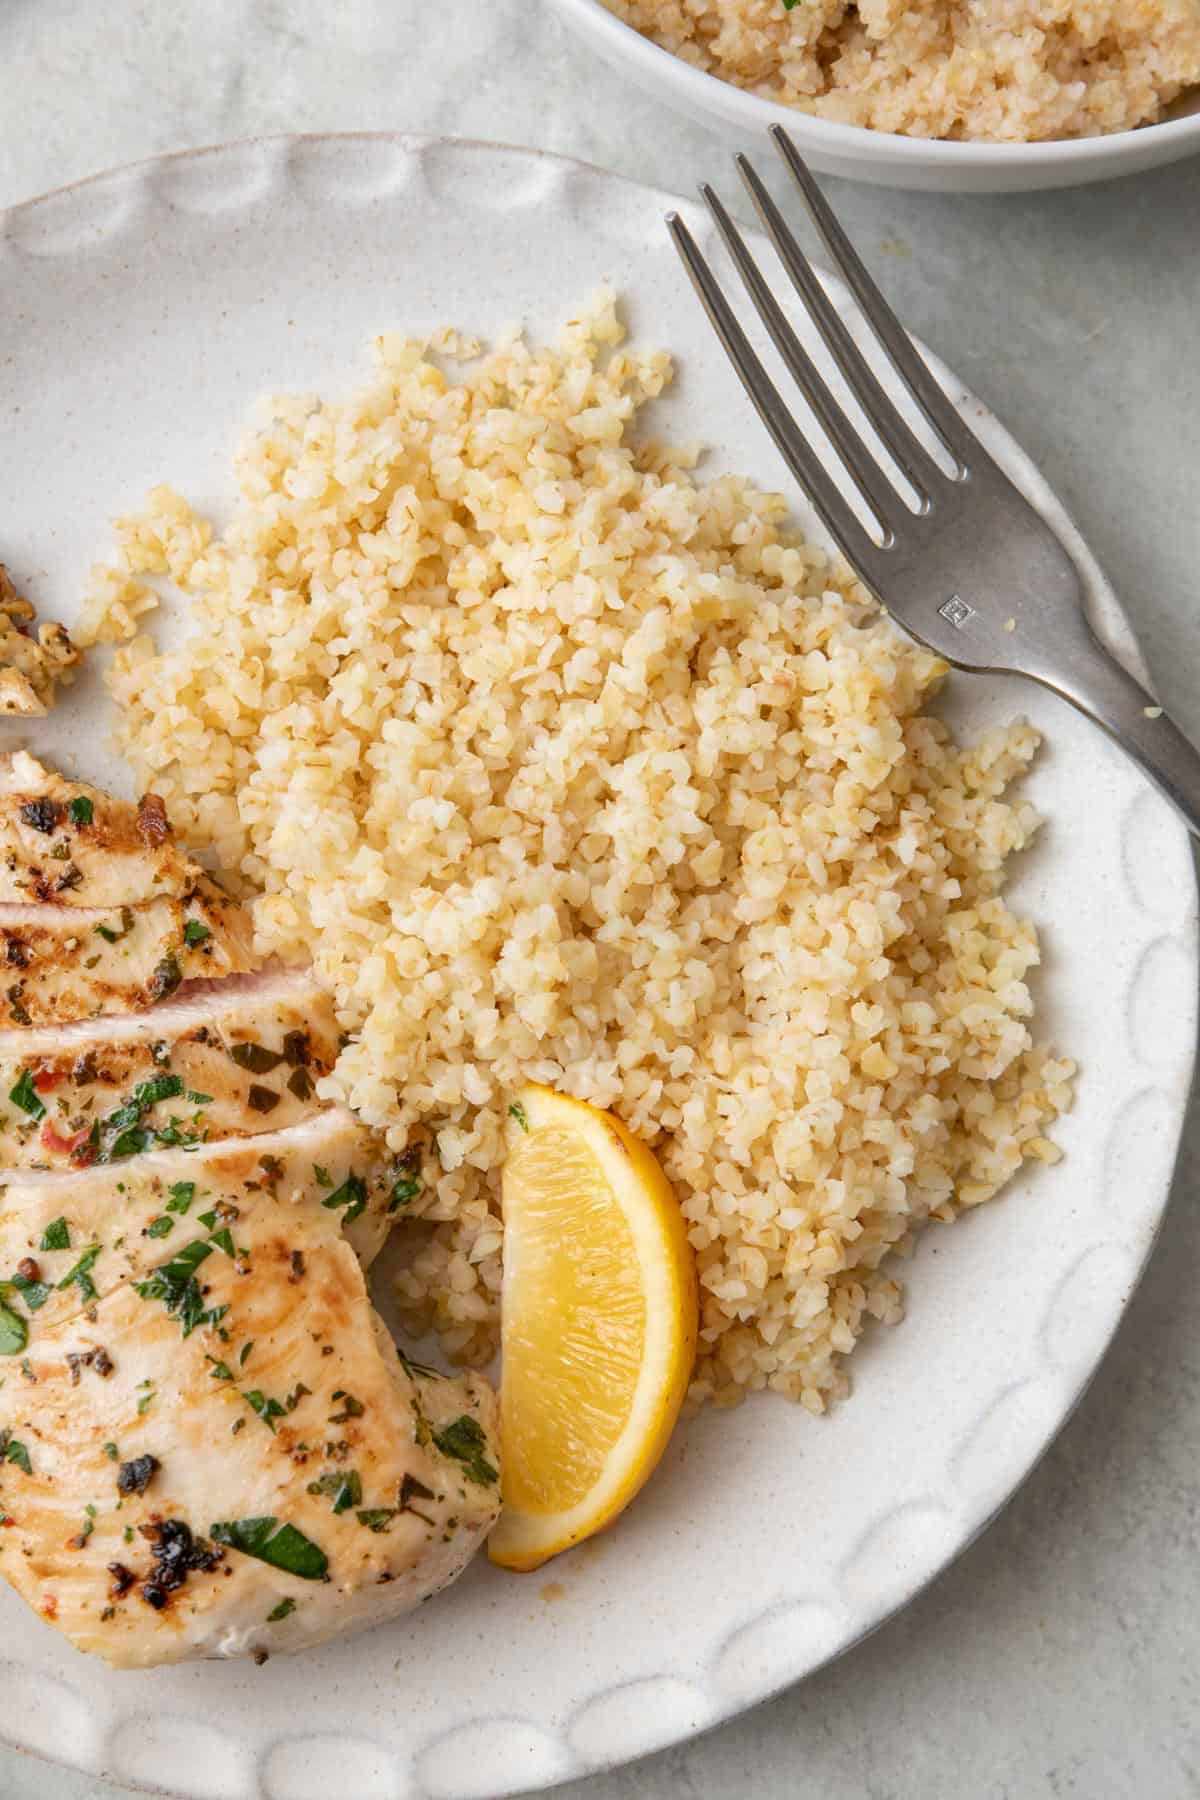 Bulgur served on a plate next to chicken with a lemon wedge and a fork resting on the plate.